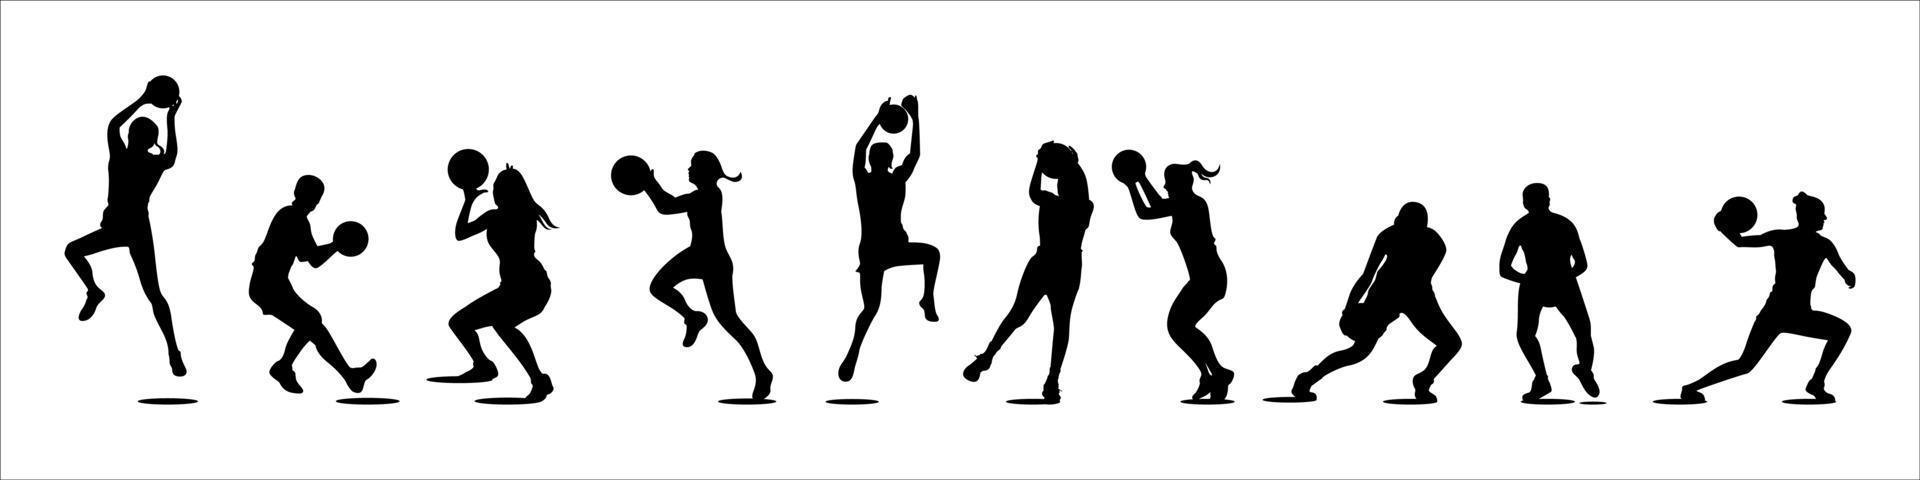 Collection of sport silhouettes vector